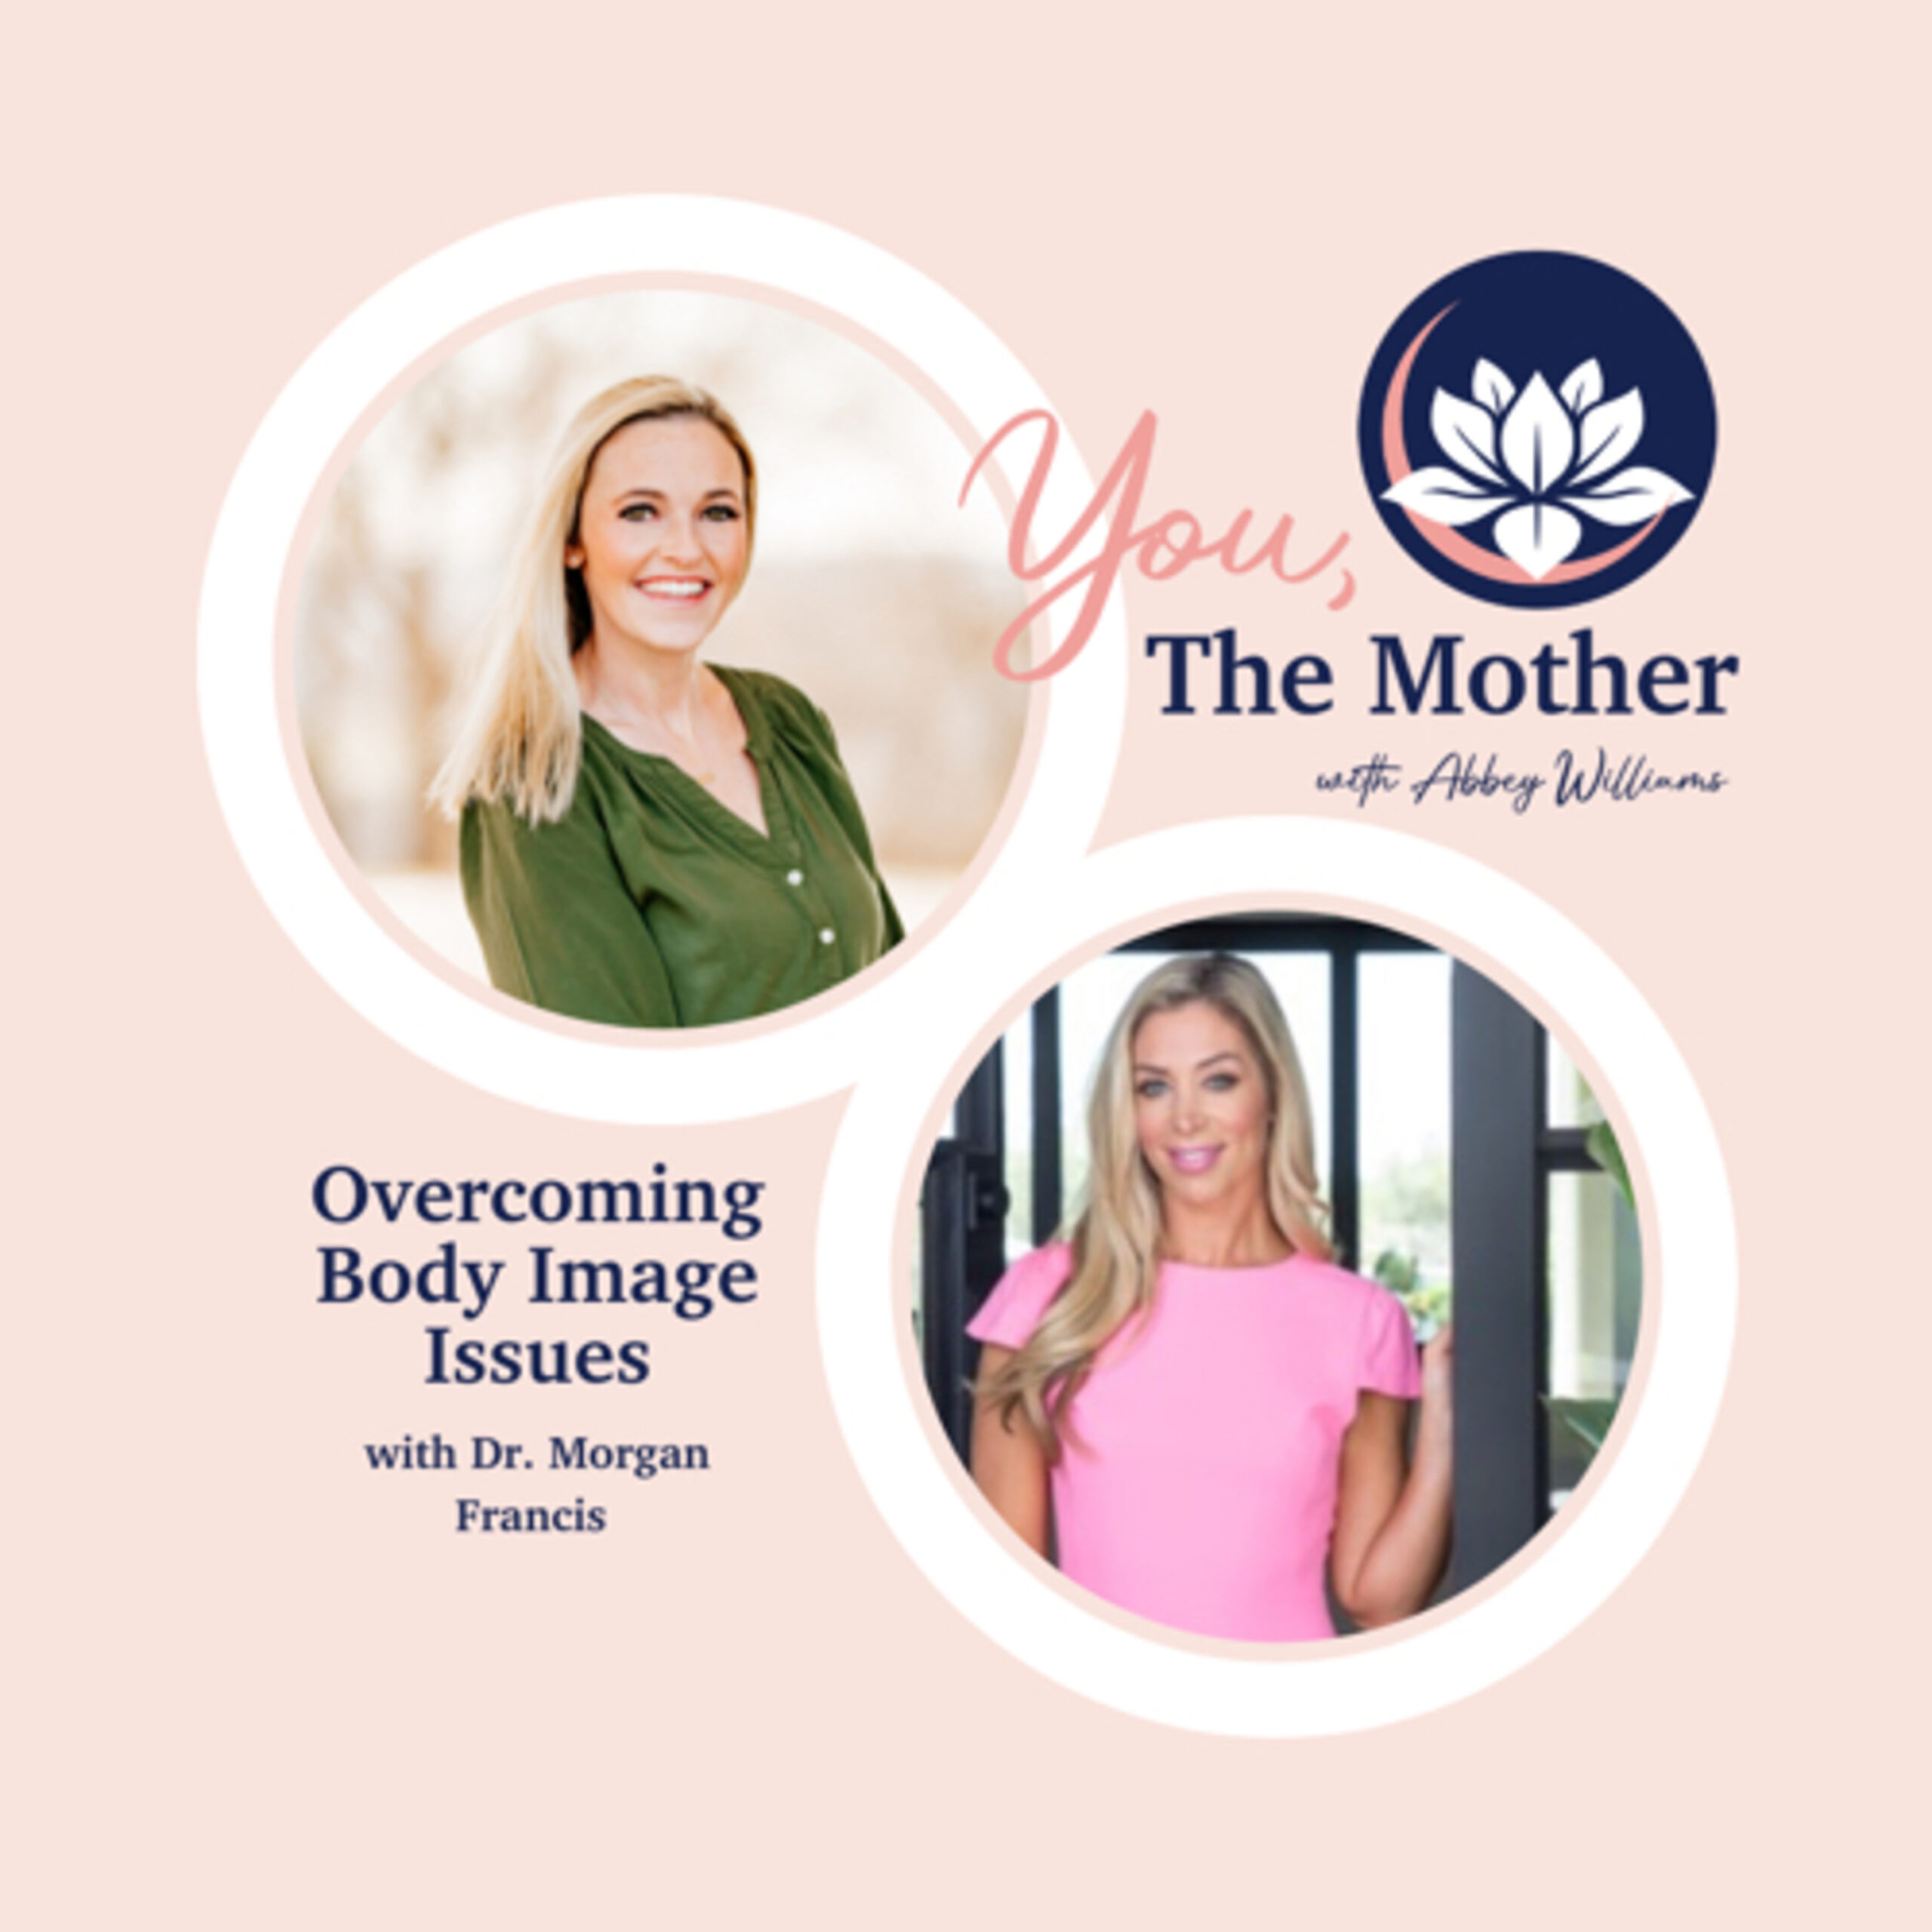 Overcoming Body Image Issues with Dr. Morgan Francis